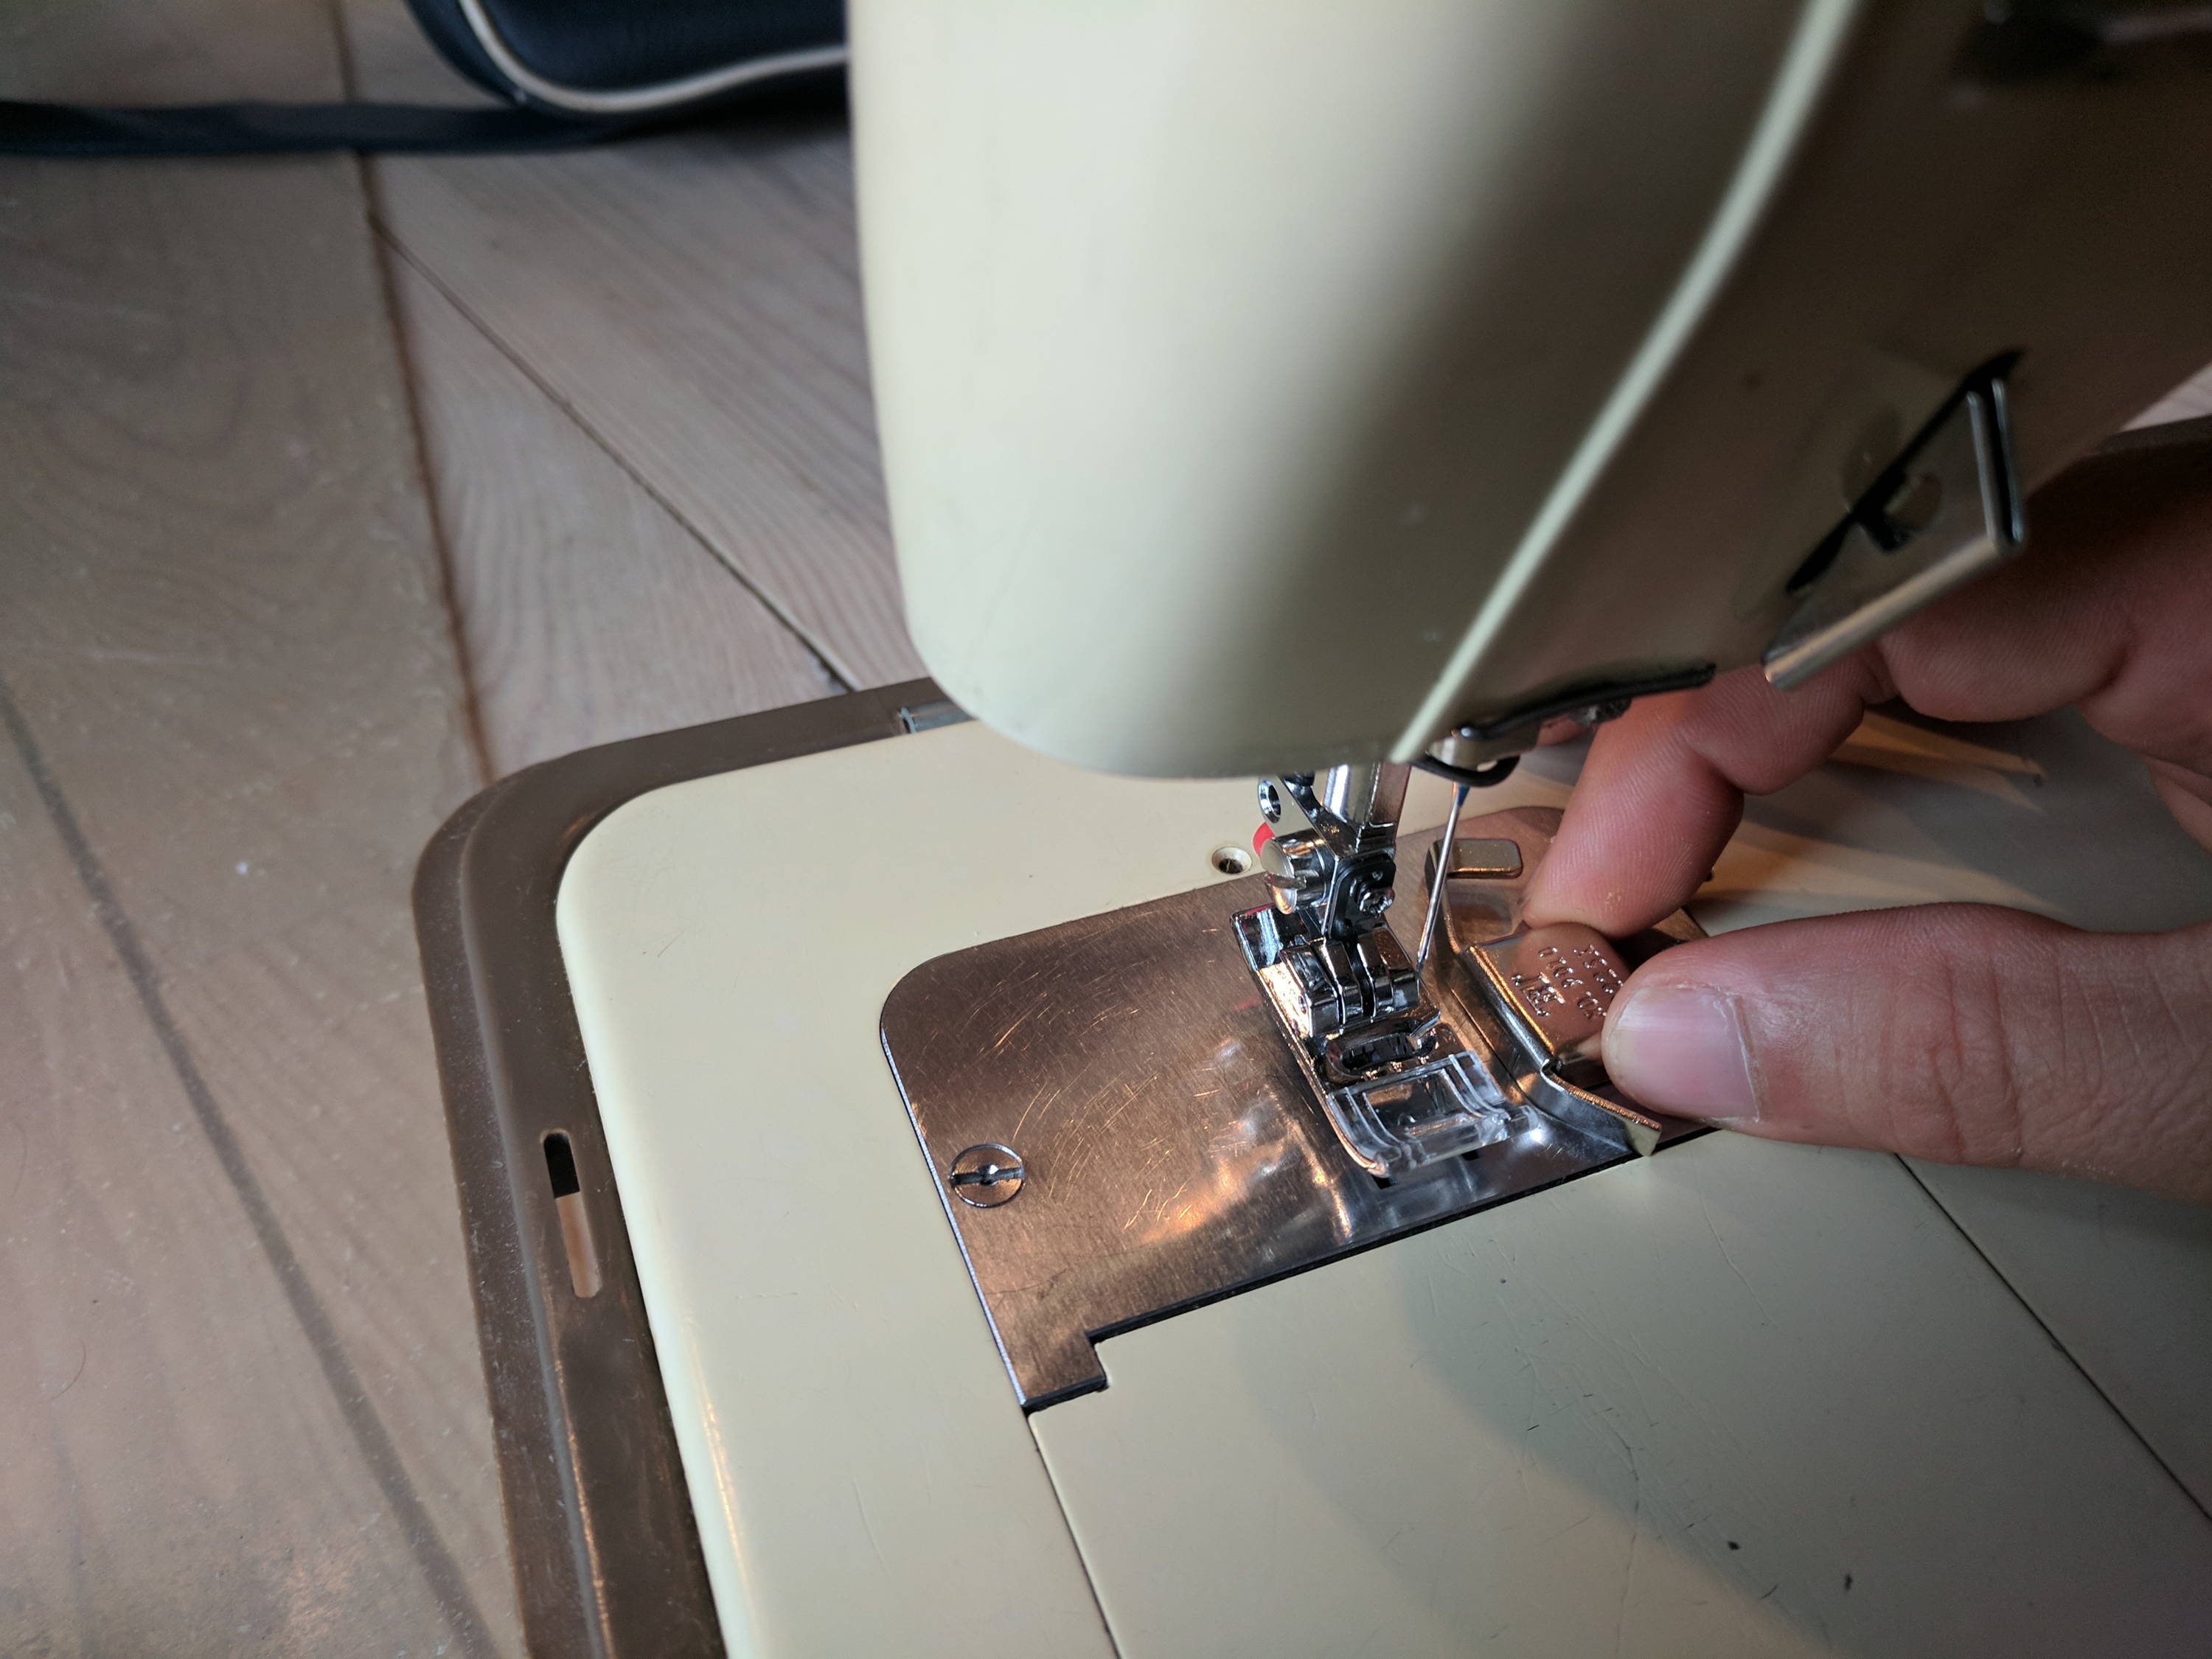 How to Use the Sew Standard Seam Guide by It's Sew Emma